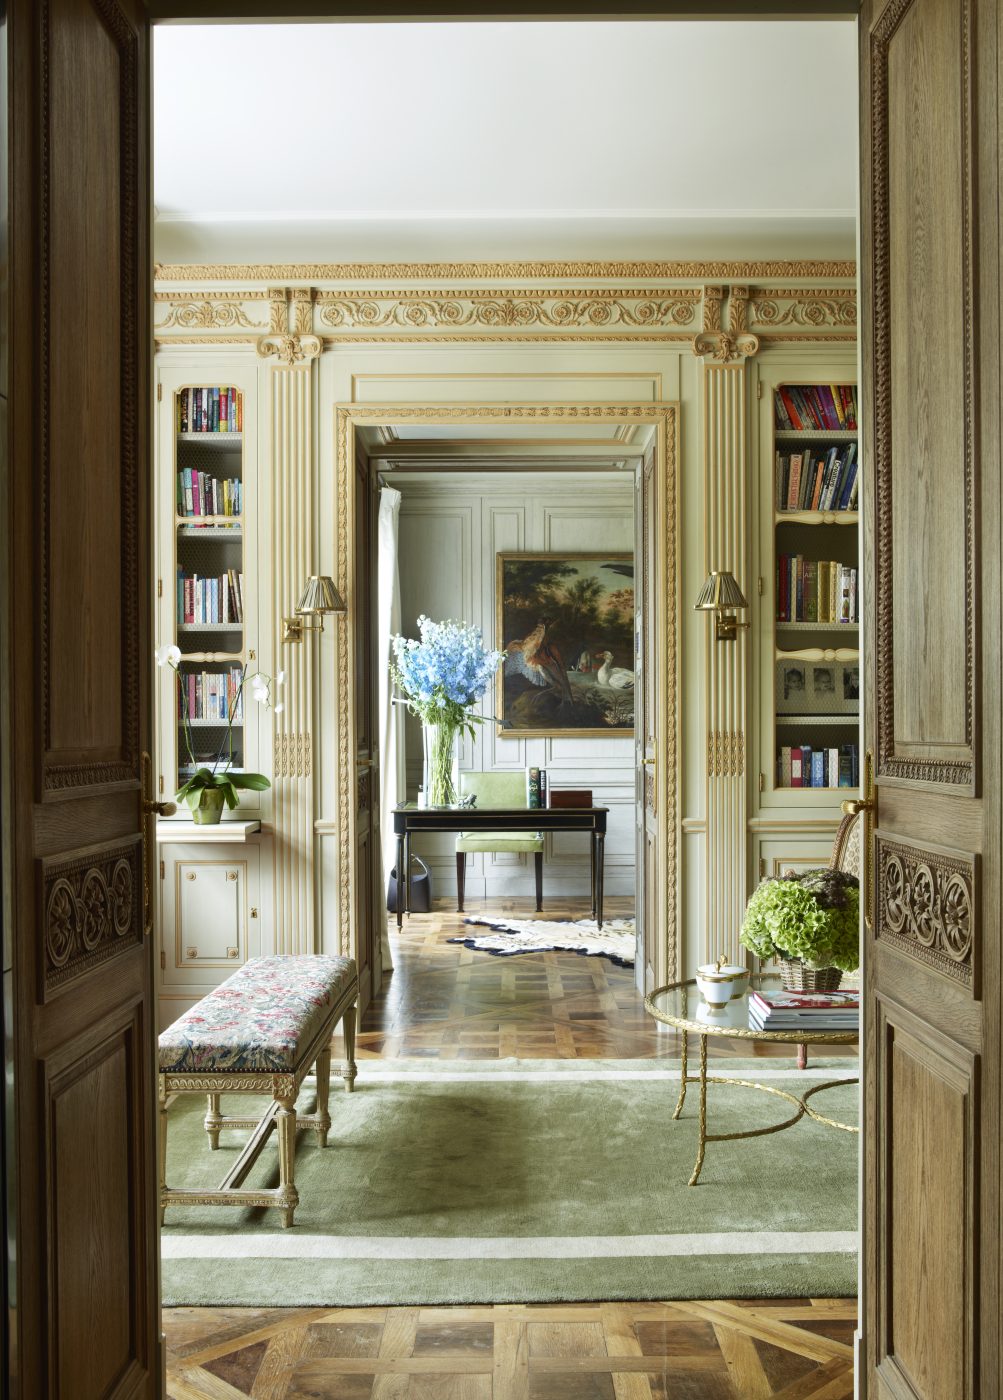 In the library, a Maison Jansen cocktail table, ca. 1950, and an 18th-century Louis XVI bench stand on a custom rug